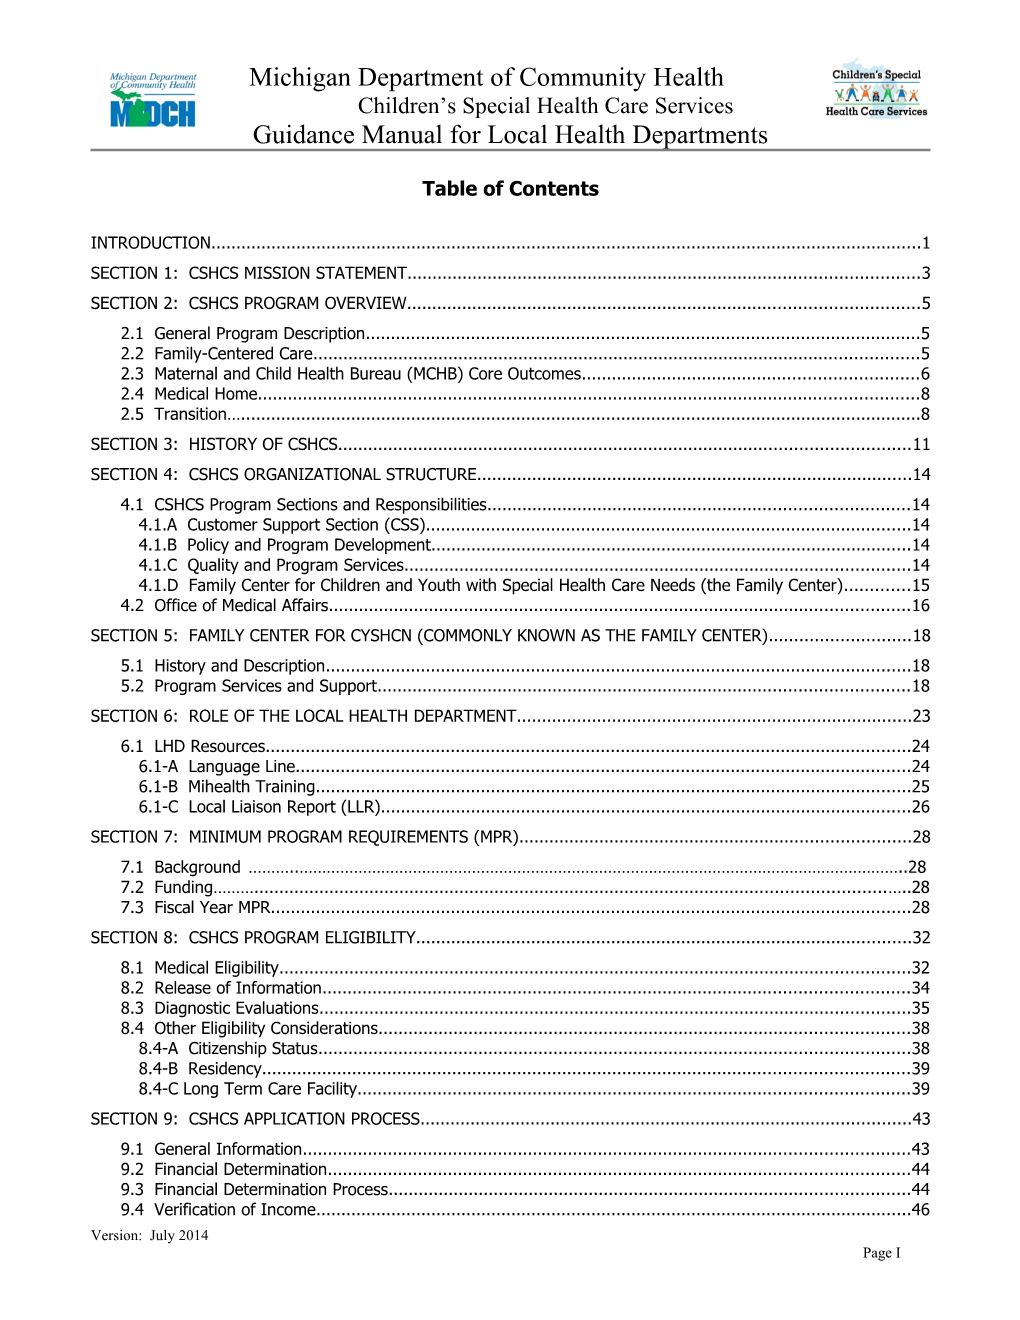 Table of Contents s137